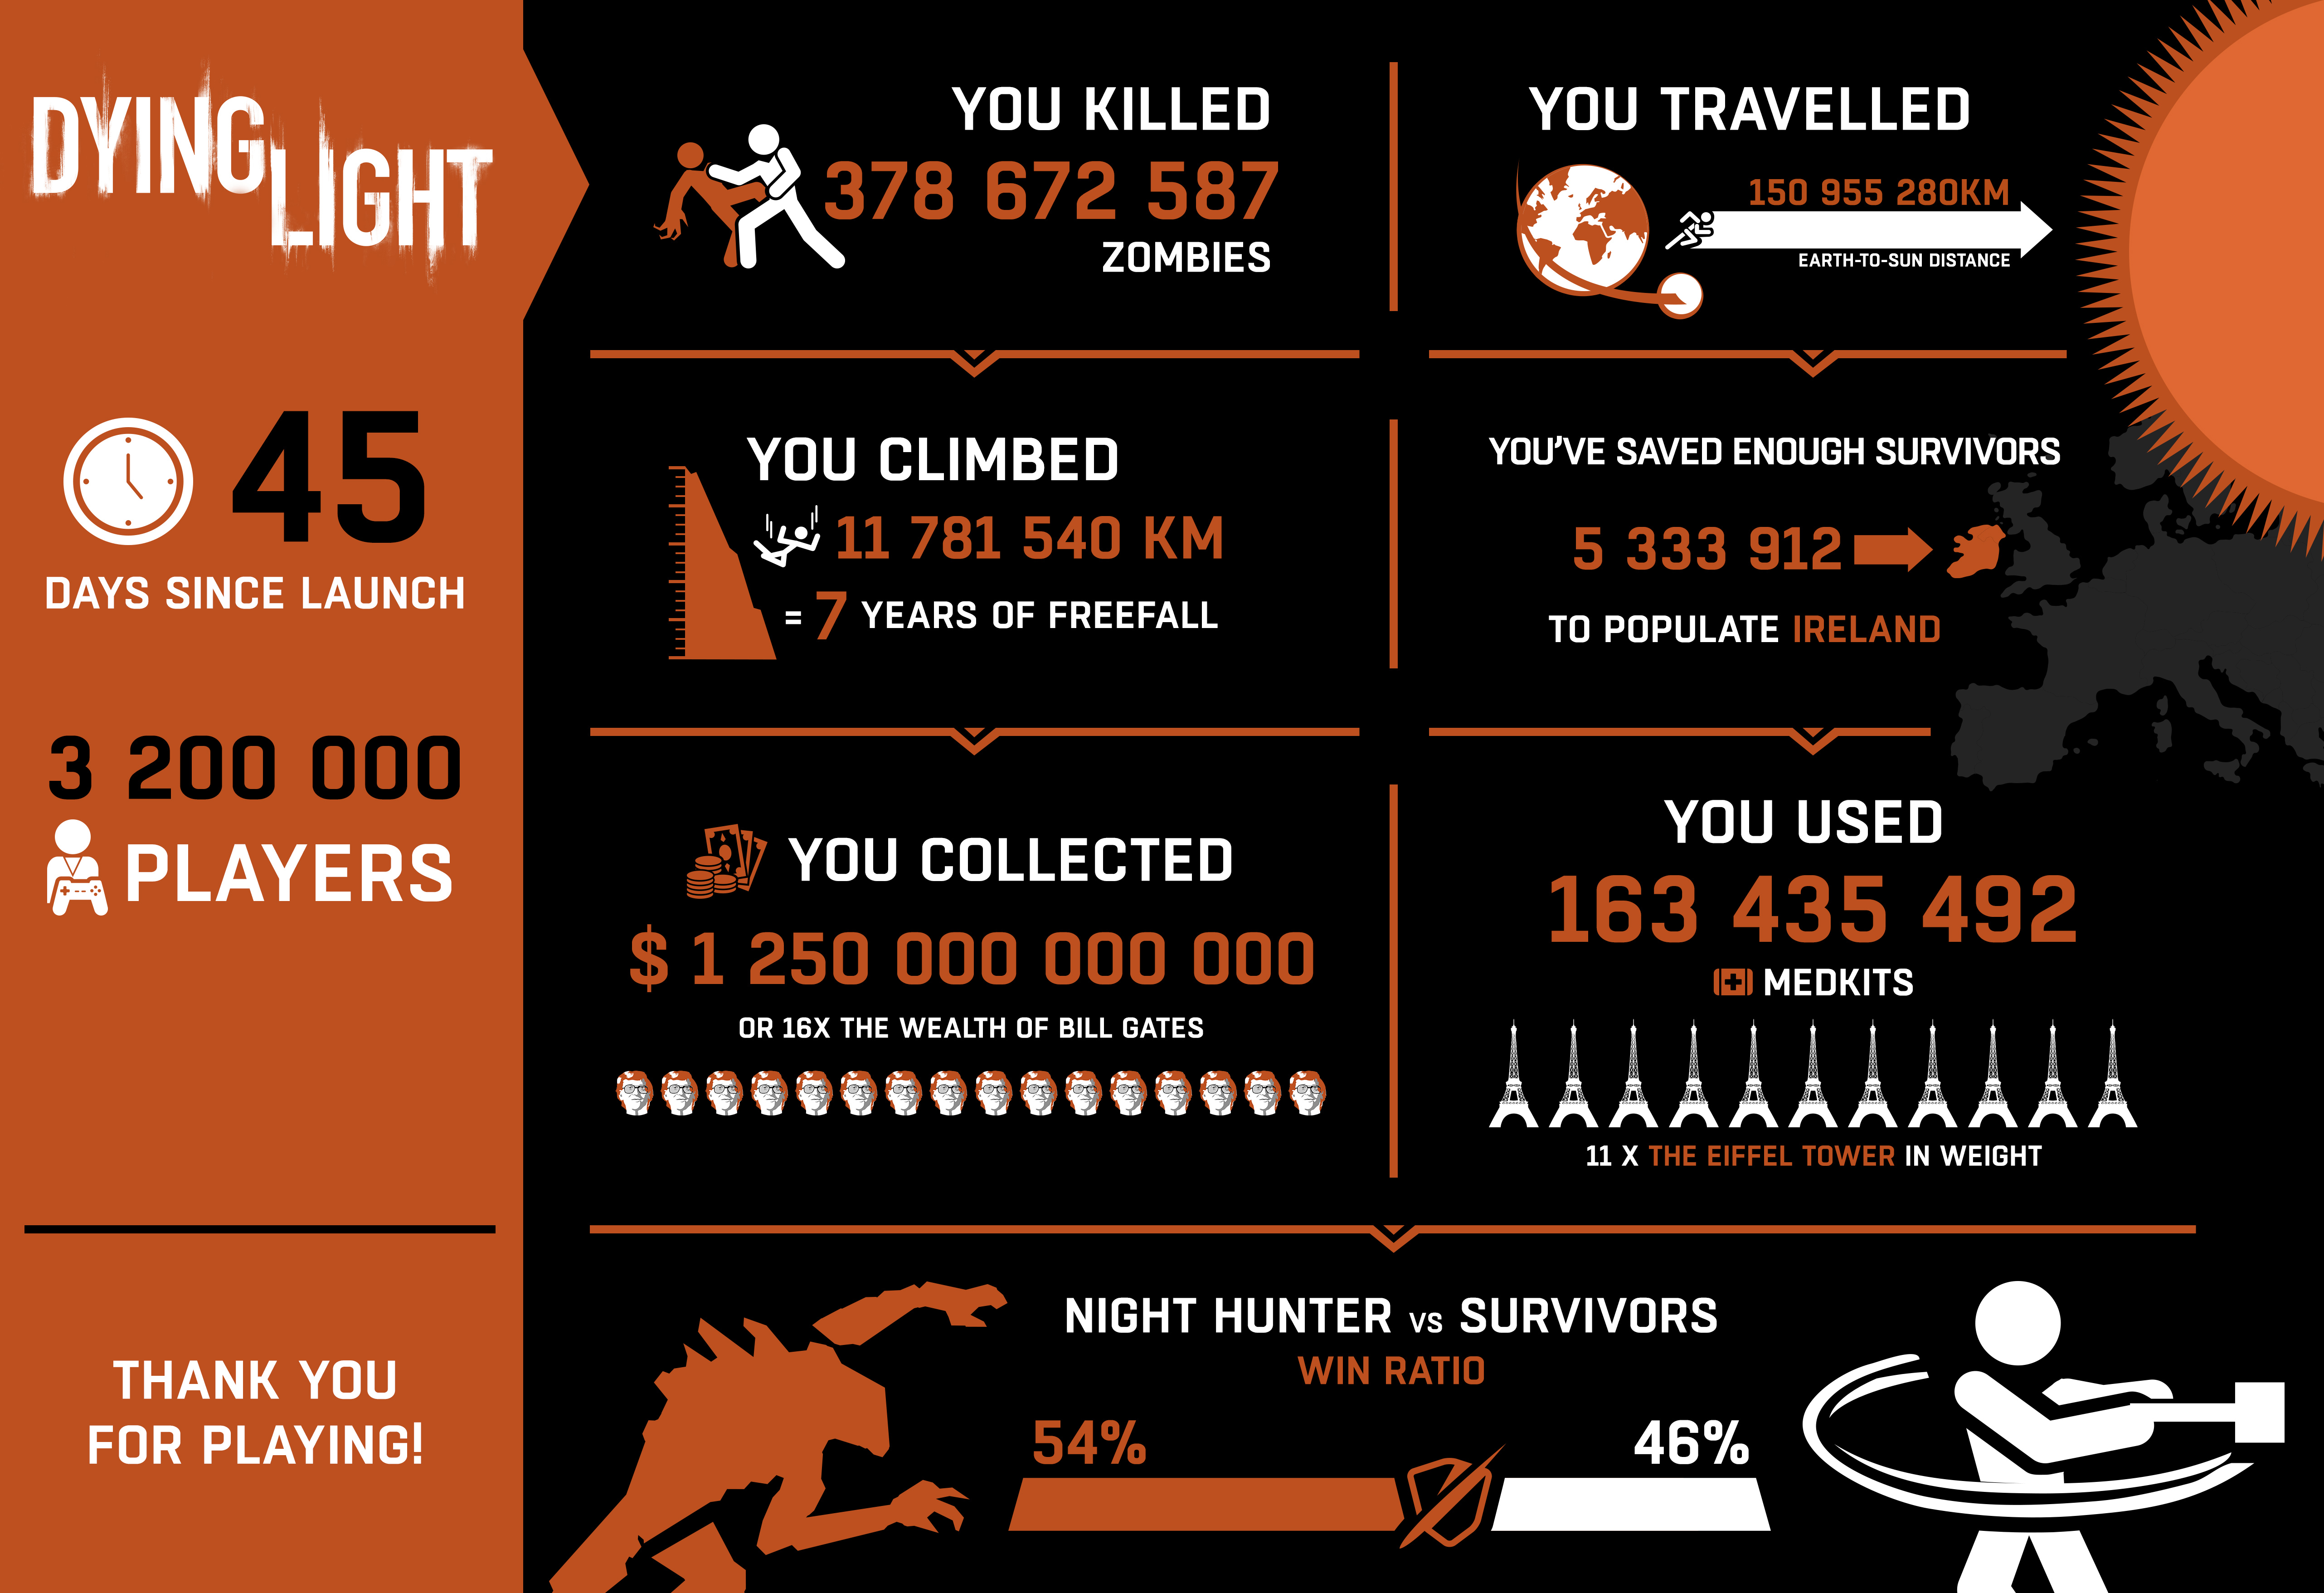 dying-light-infographic-km